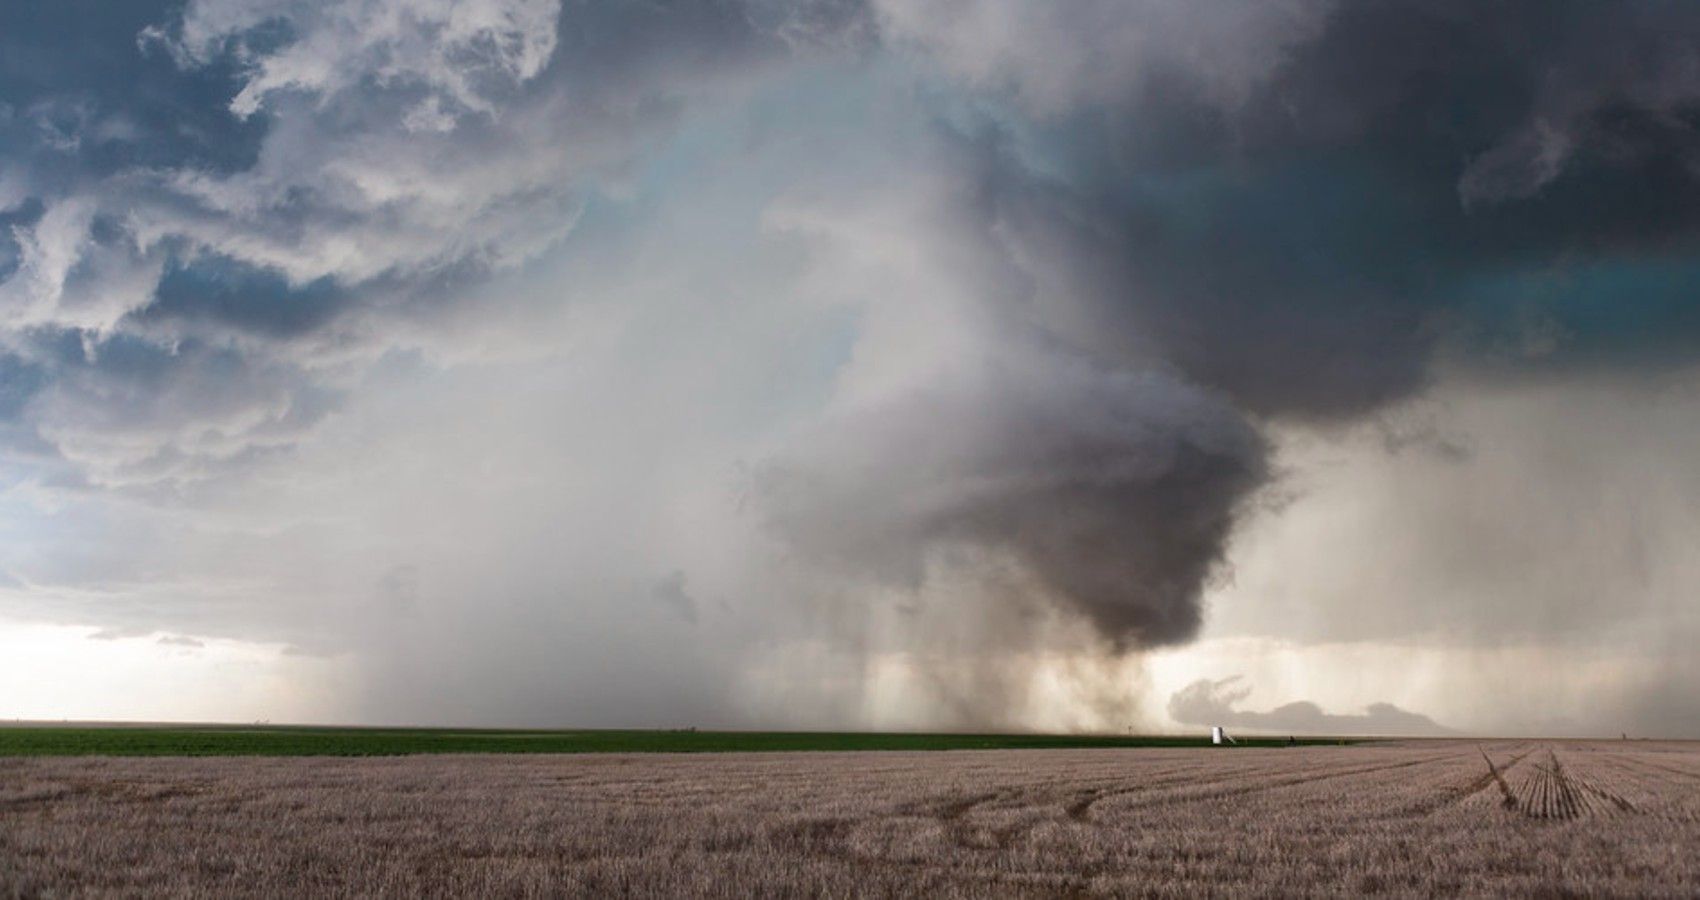 A picture of a tornado in the distance